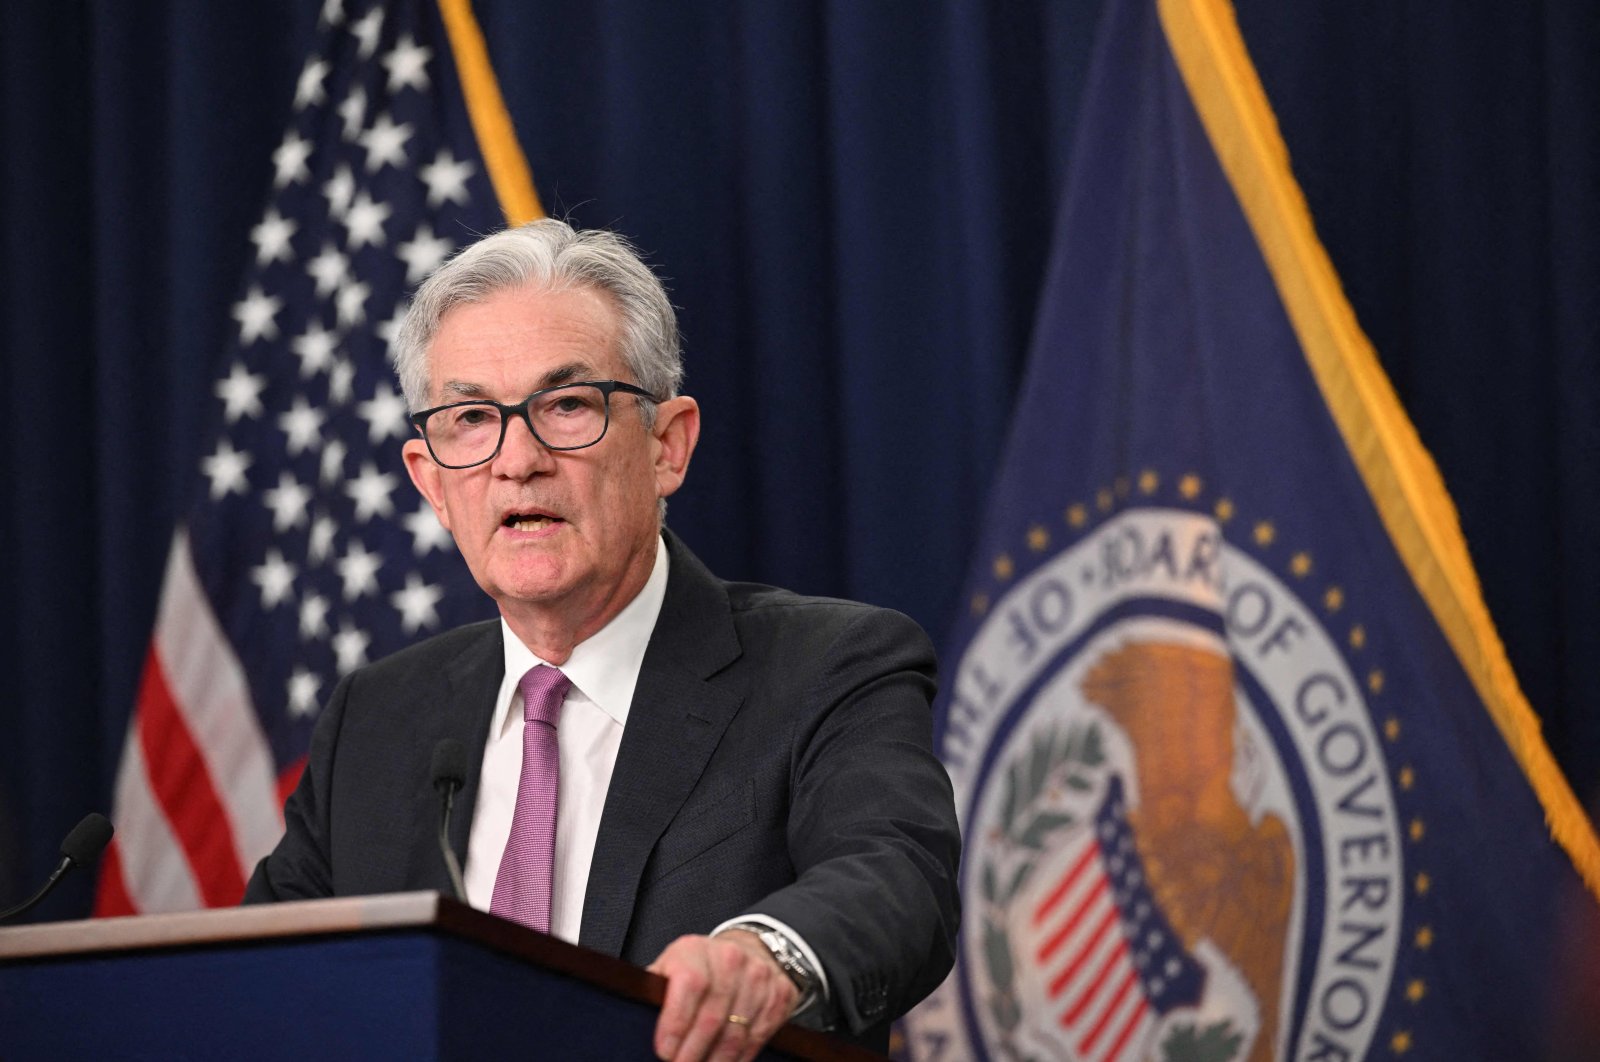 Federal Reserve Board Chairperson Jerome Powell speaks during a news conference in Washington, D.C., U.S., July 27, 2022. (AFP Photo)